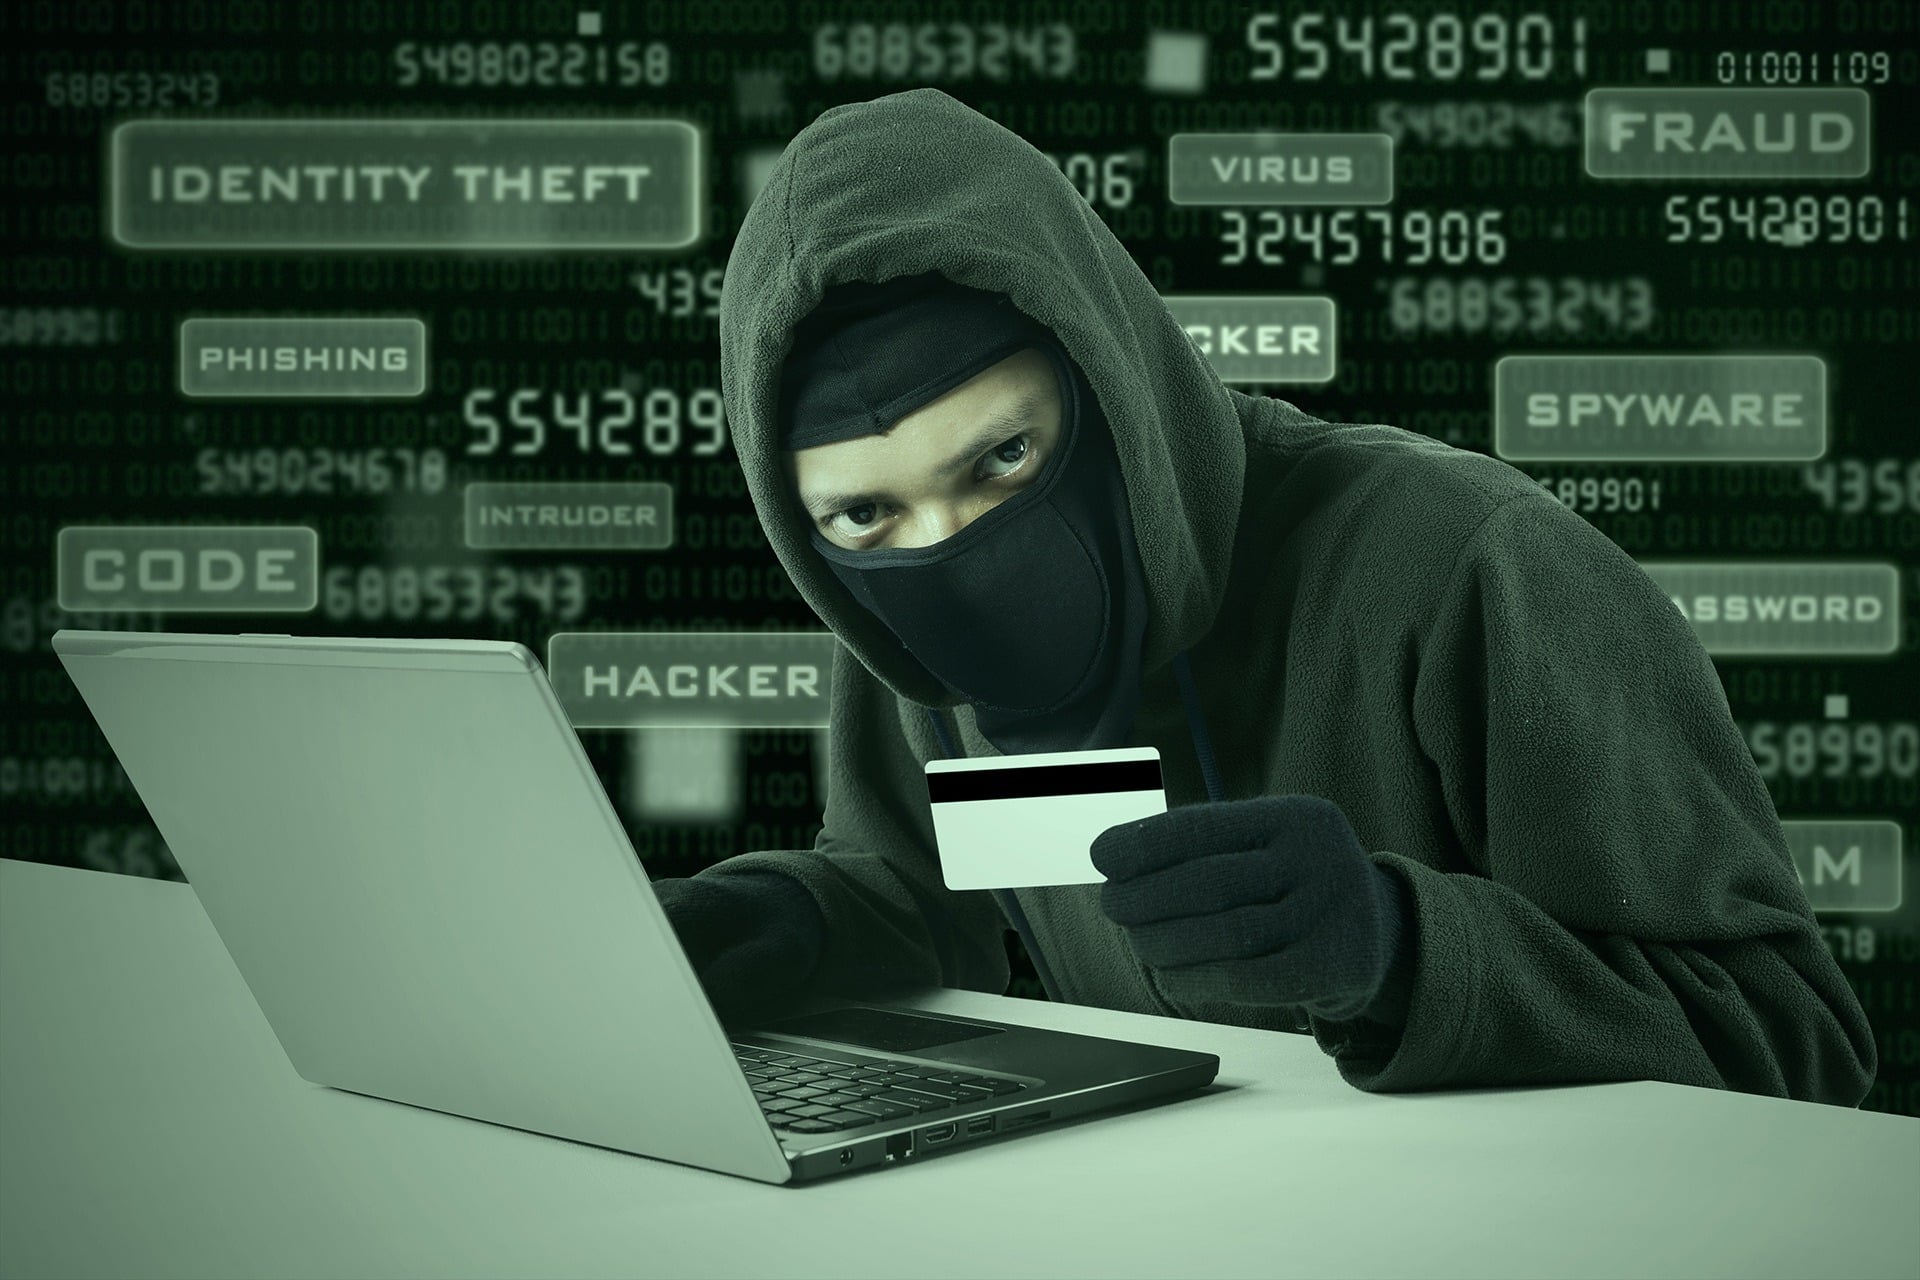 a man in a mask holding a credit card and looking at a laptop